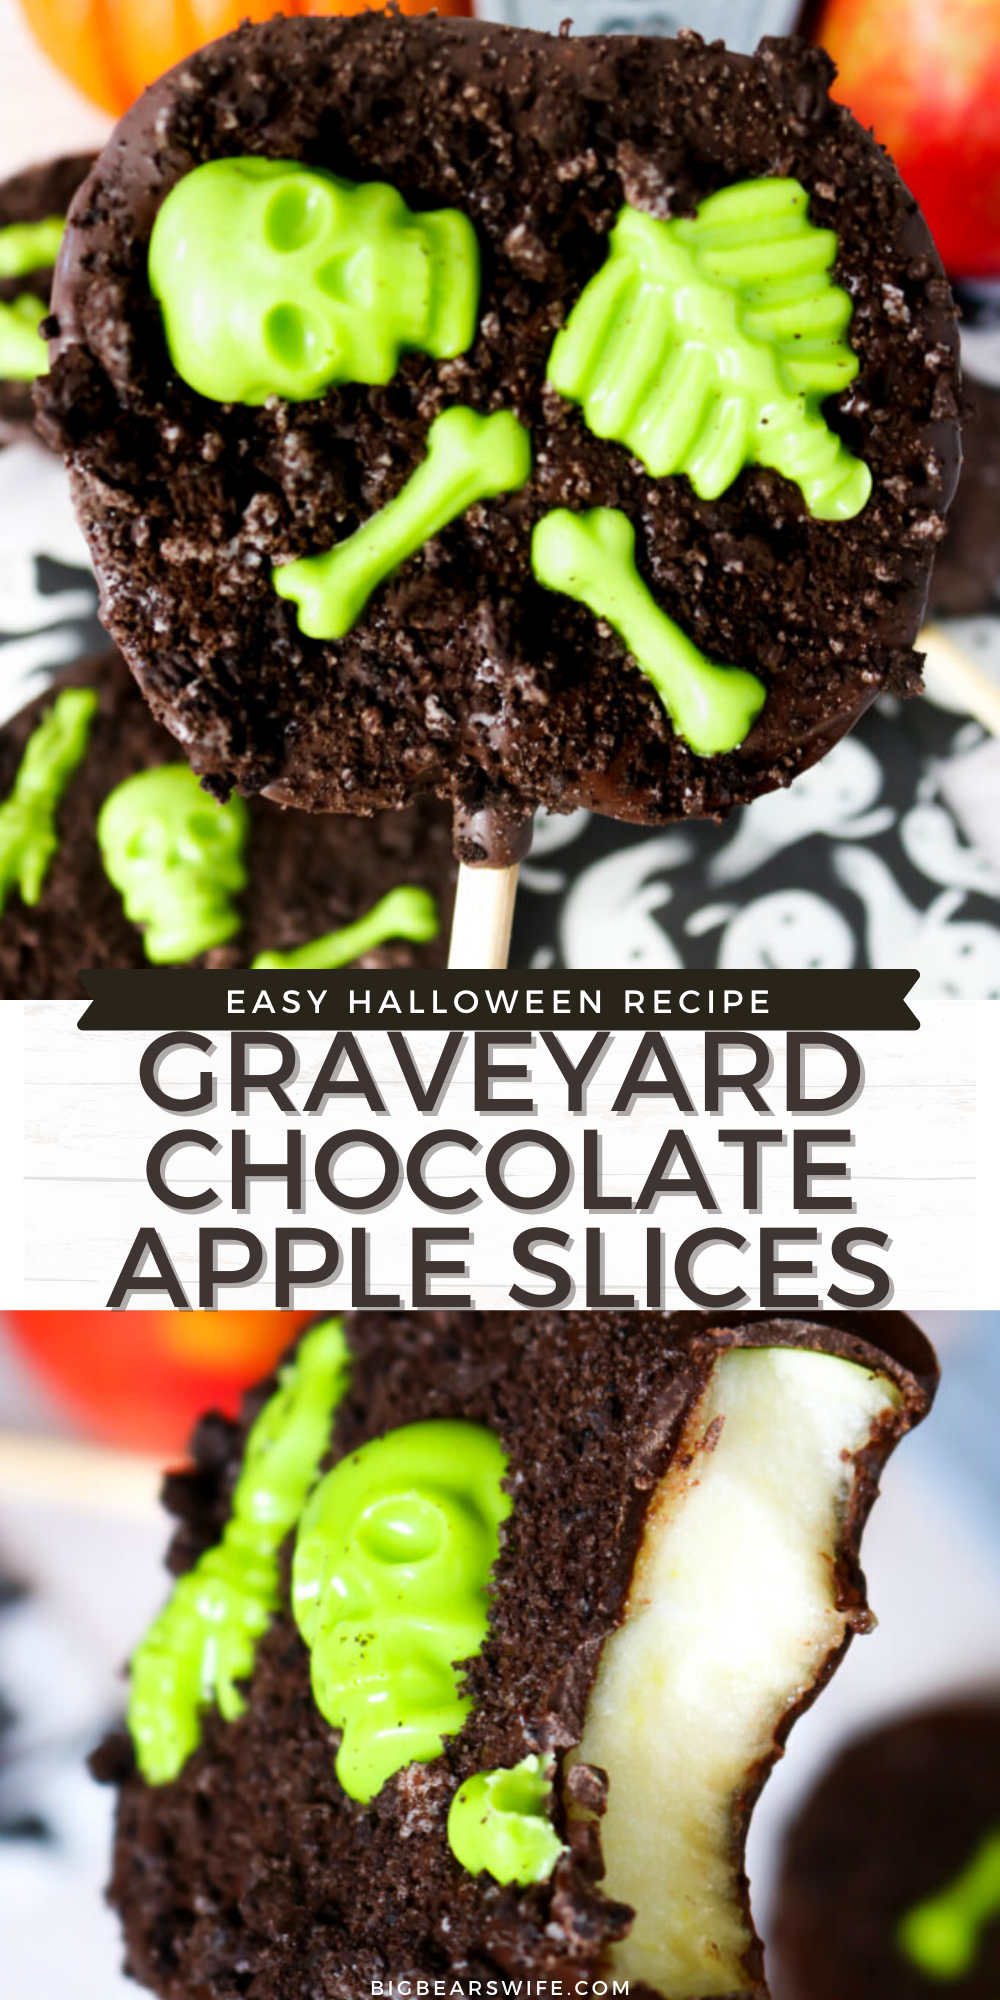 Melted chocolate and candy skeletons decorate fresh apple slices for a tasty Halloween treats that kids and adults will love!  You'll love how easy these Graveyard Chocolate Apple Slices are to make and decorate too!  via @bigbearswife